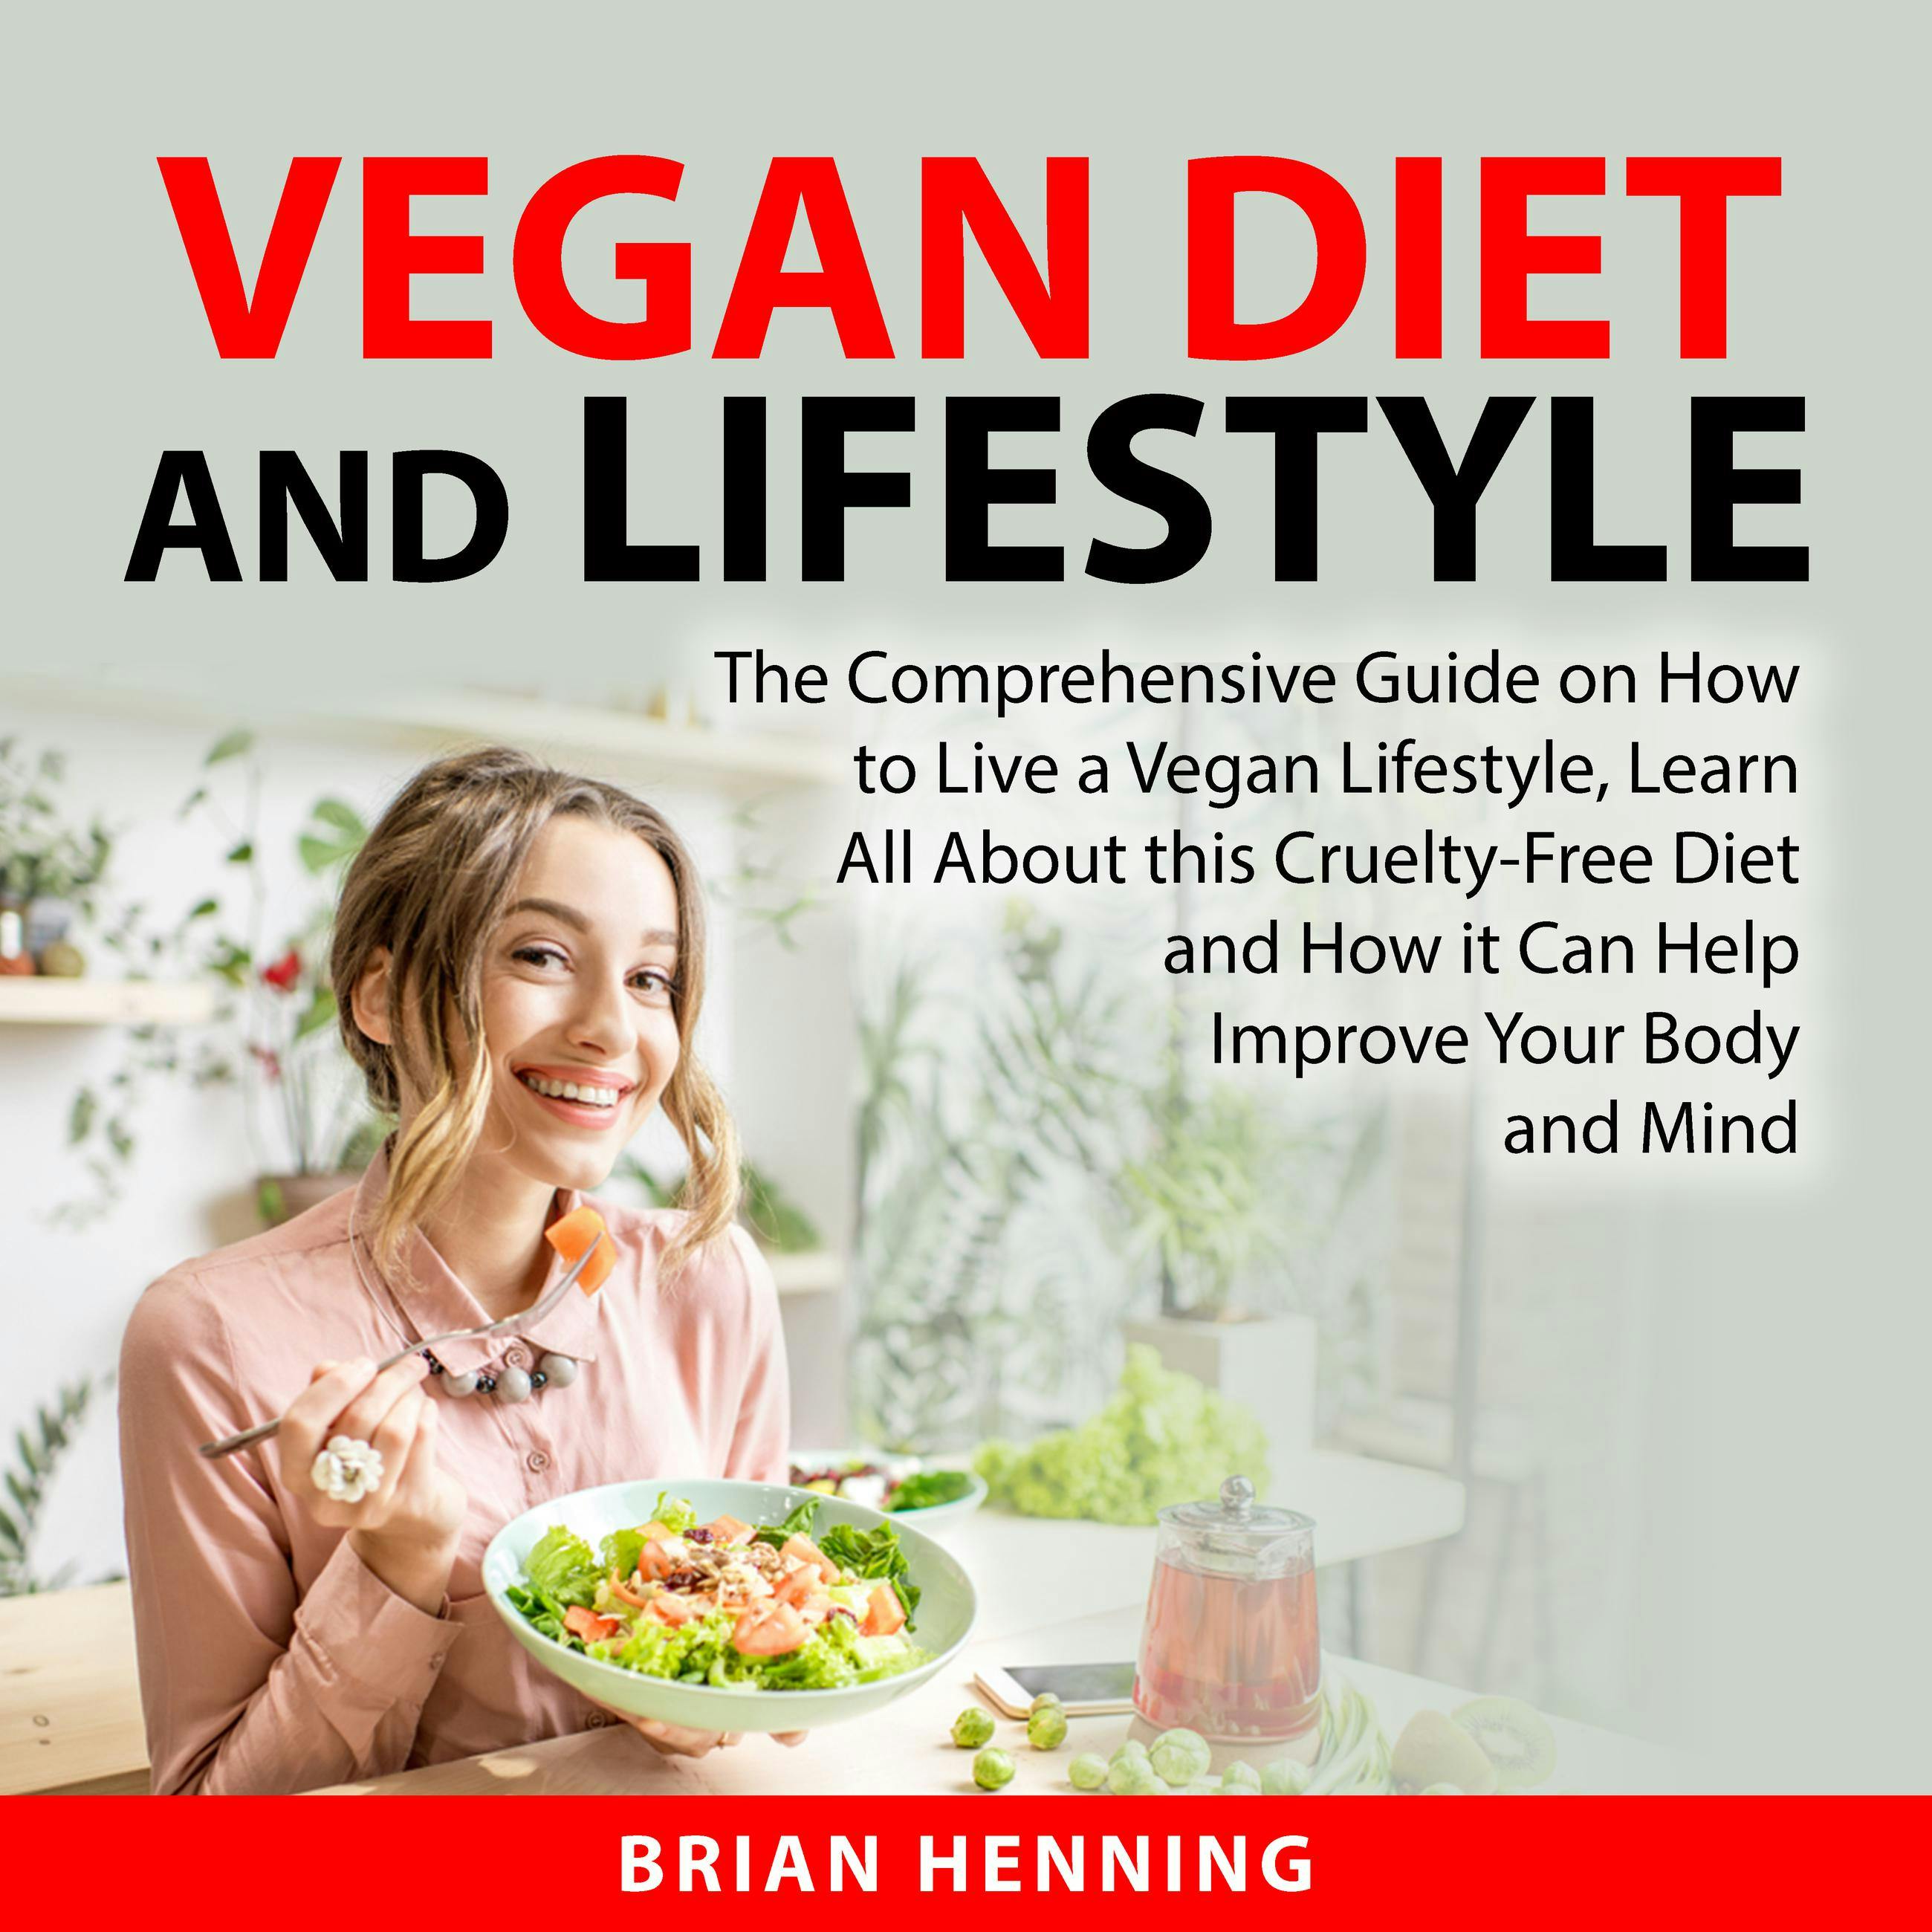 Vegan Diet and Lifestyle: The Comprehensive Guide on How to Live a Vegan Lifestyle, Learn All About this Cruelty-Free Diet and How it Can Help Improve Your Body and Mind - Brian Henning